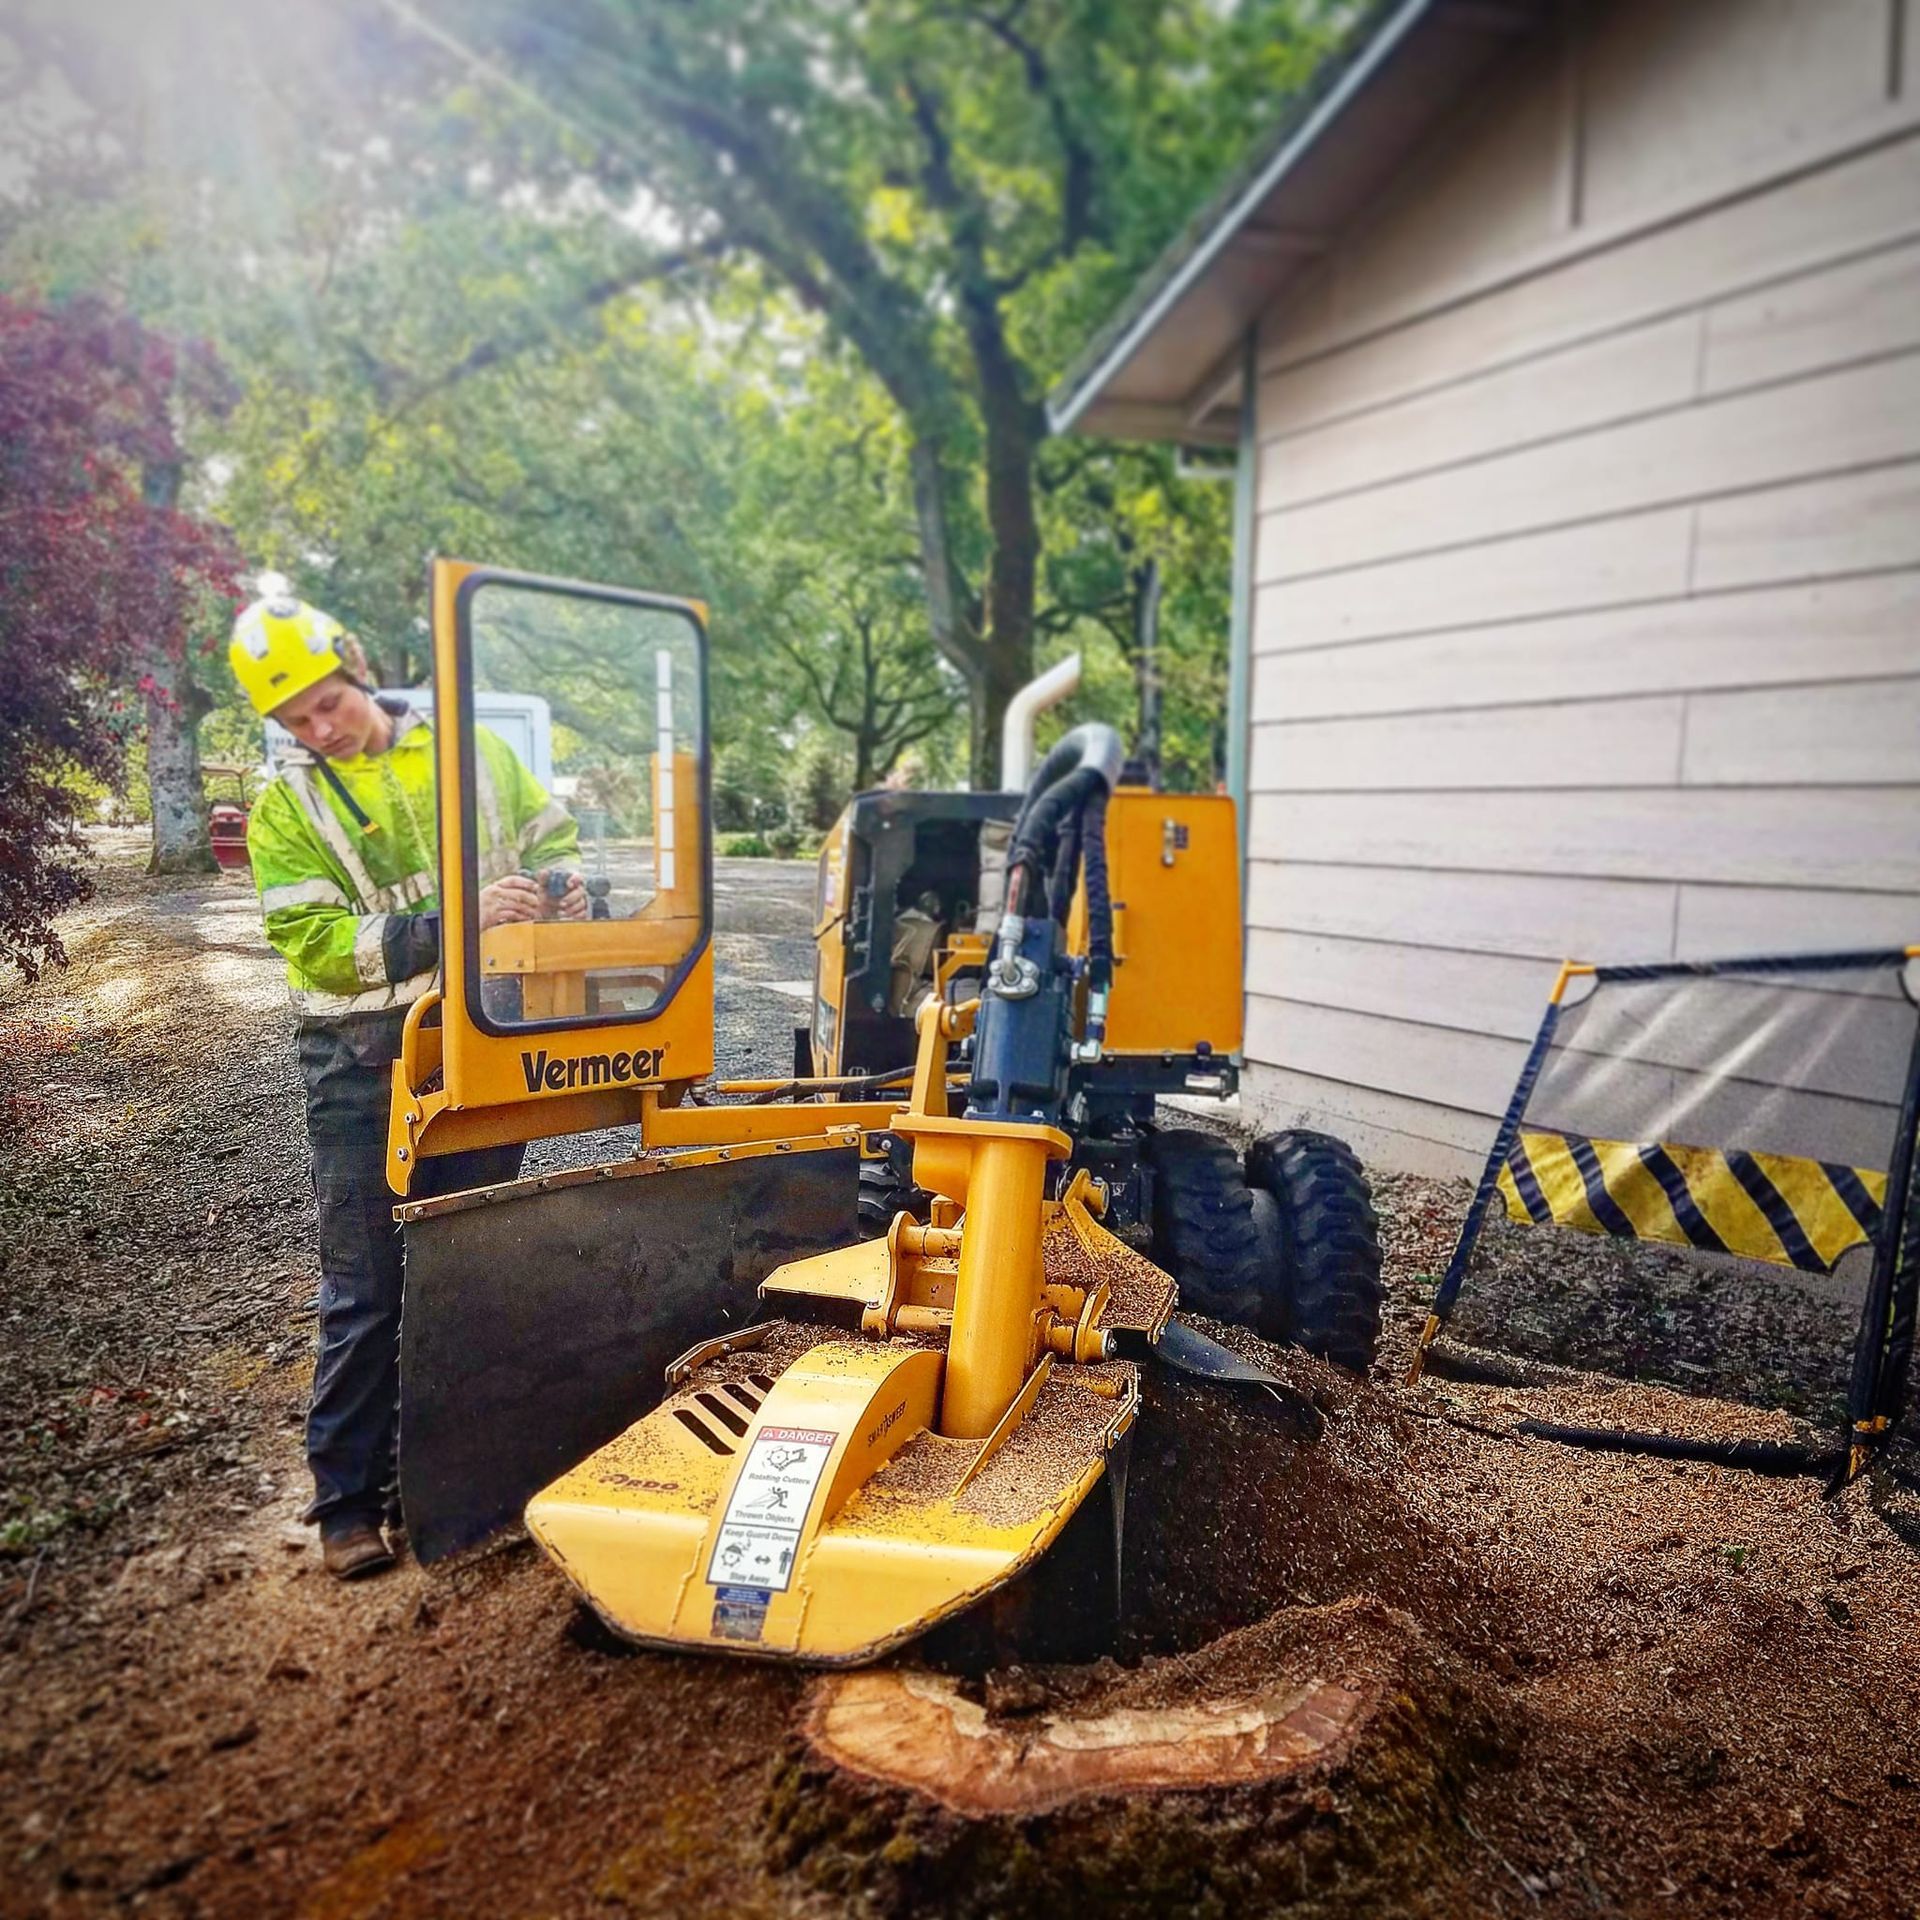 About Trees removing a tree in Redding, CA